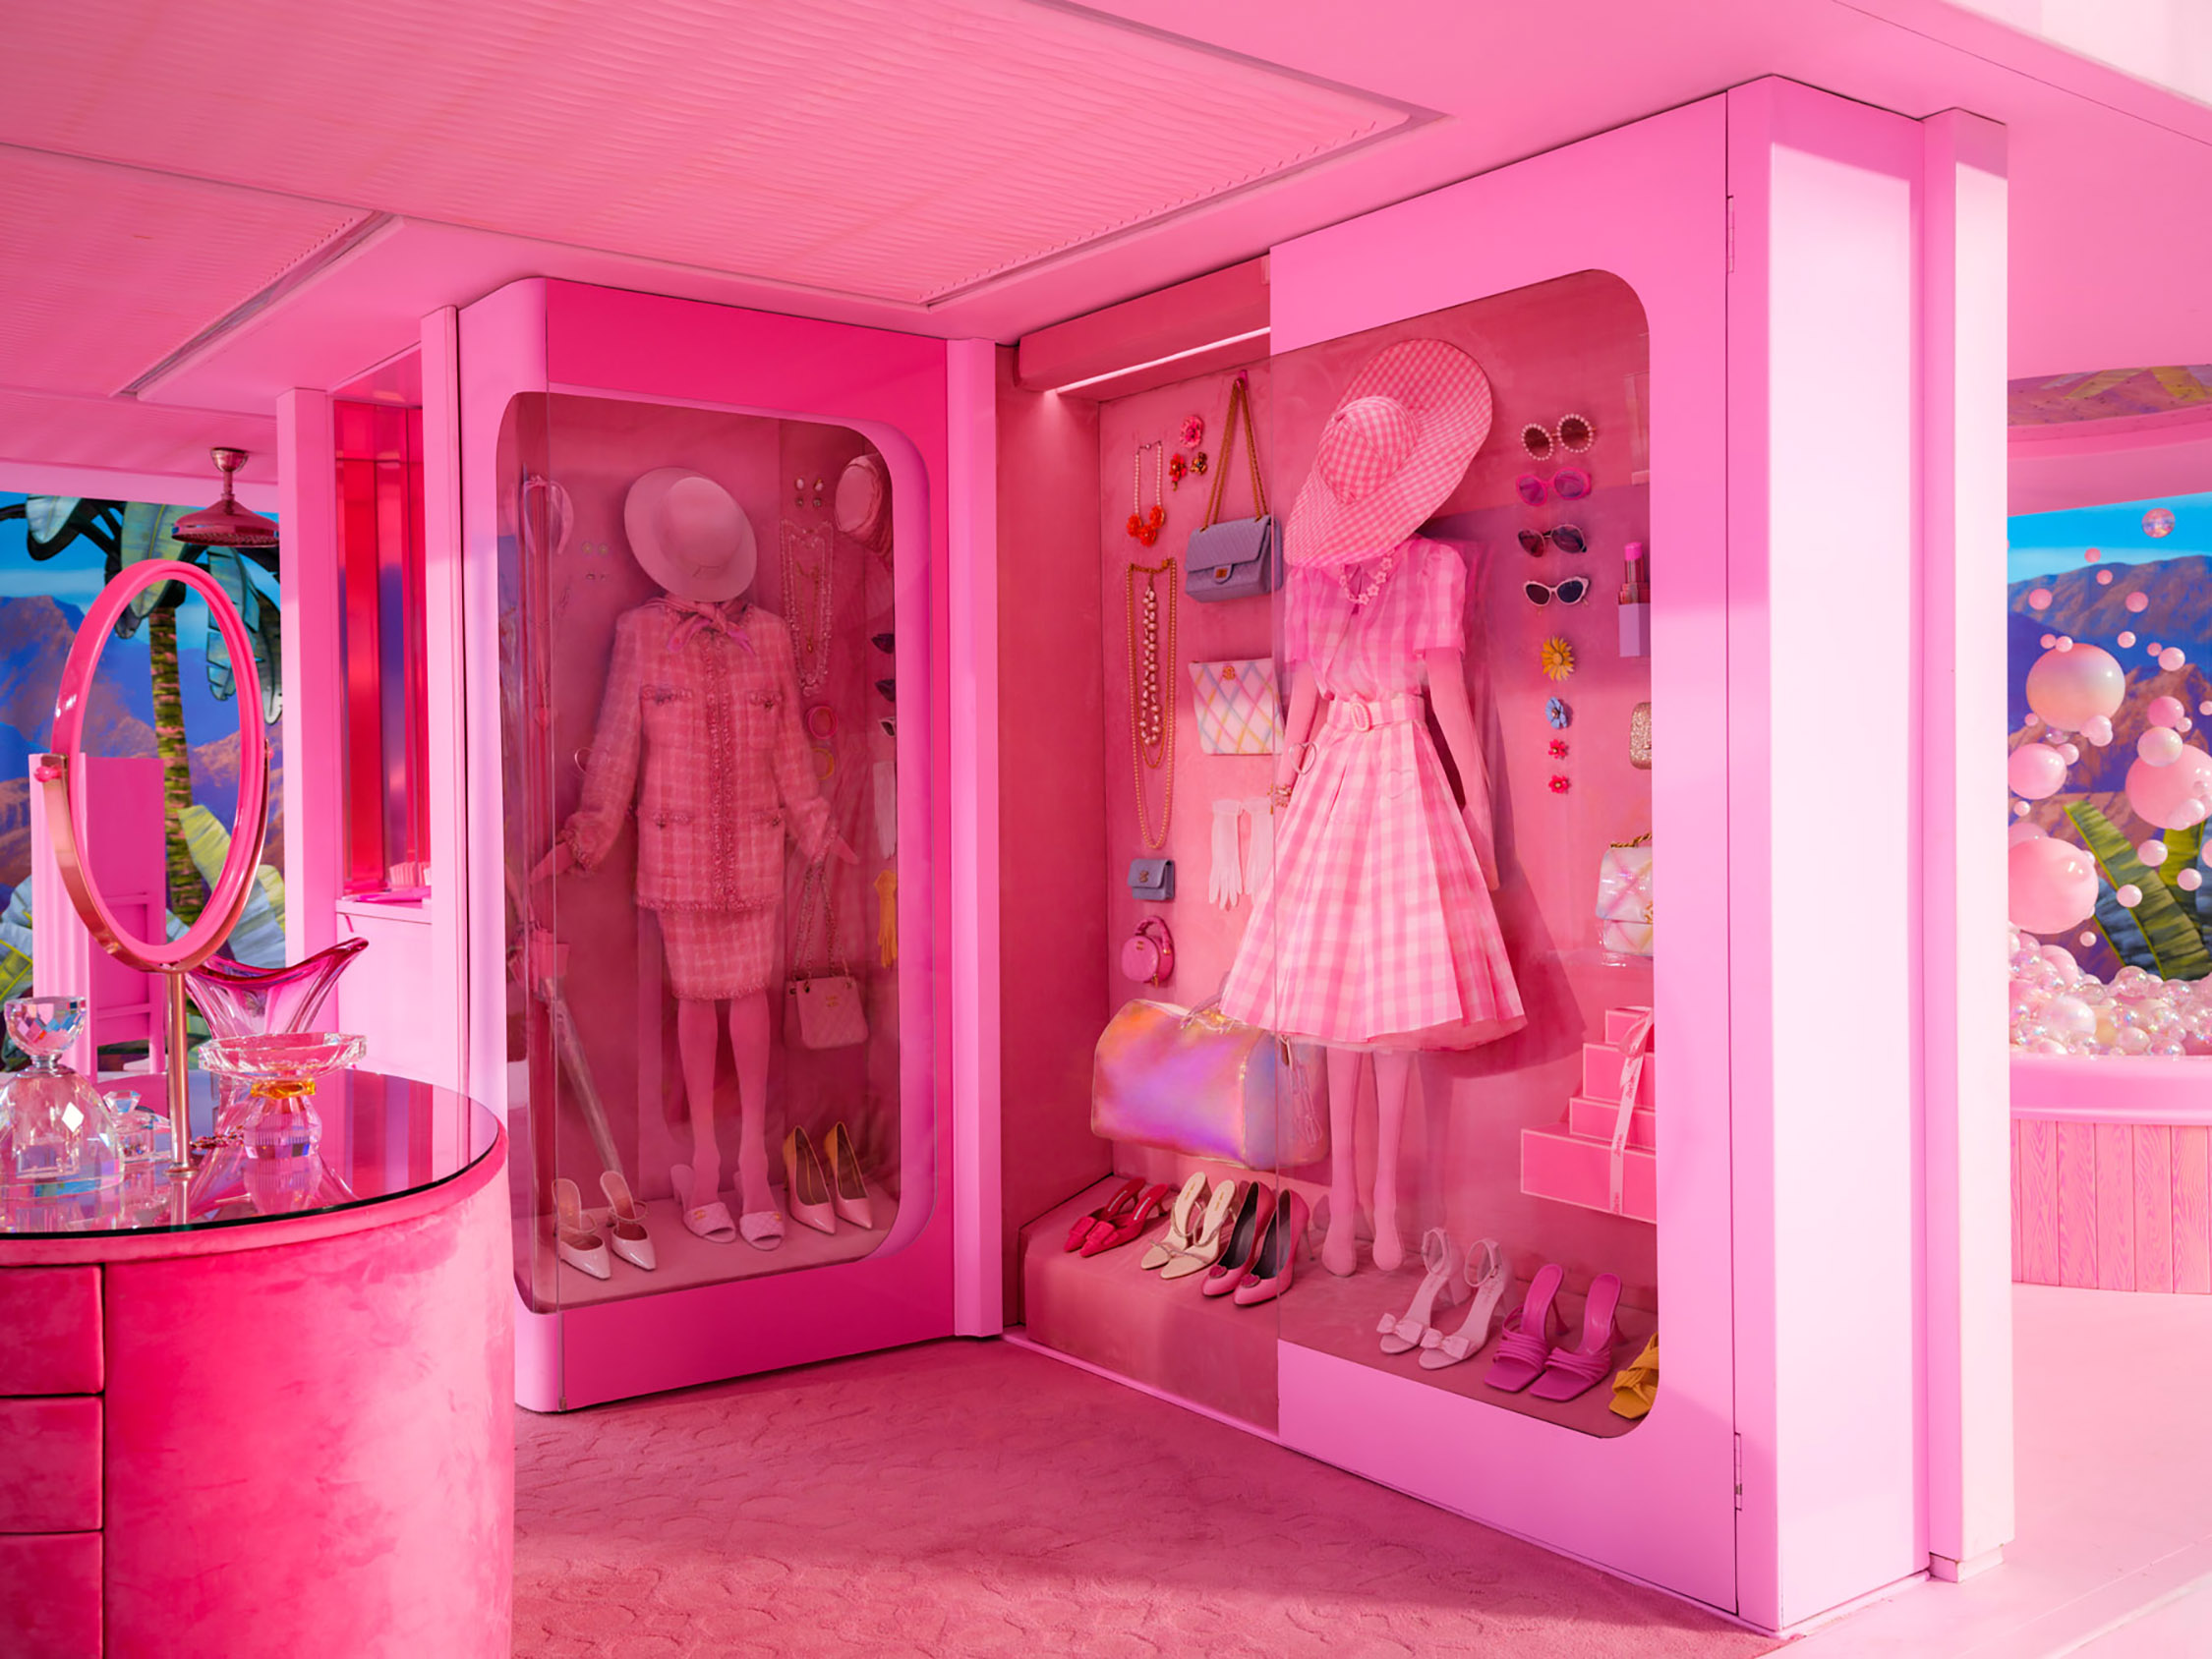 Go Behind-The-Scenes Of 'Barbie' With Chanel